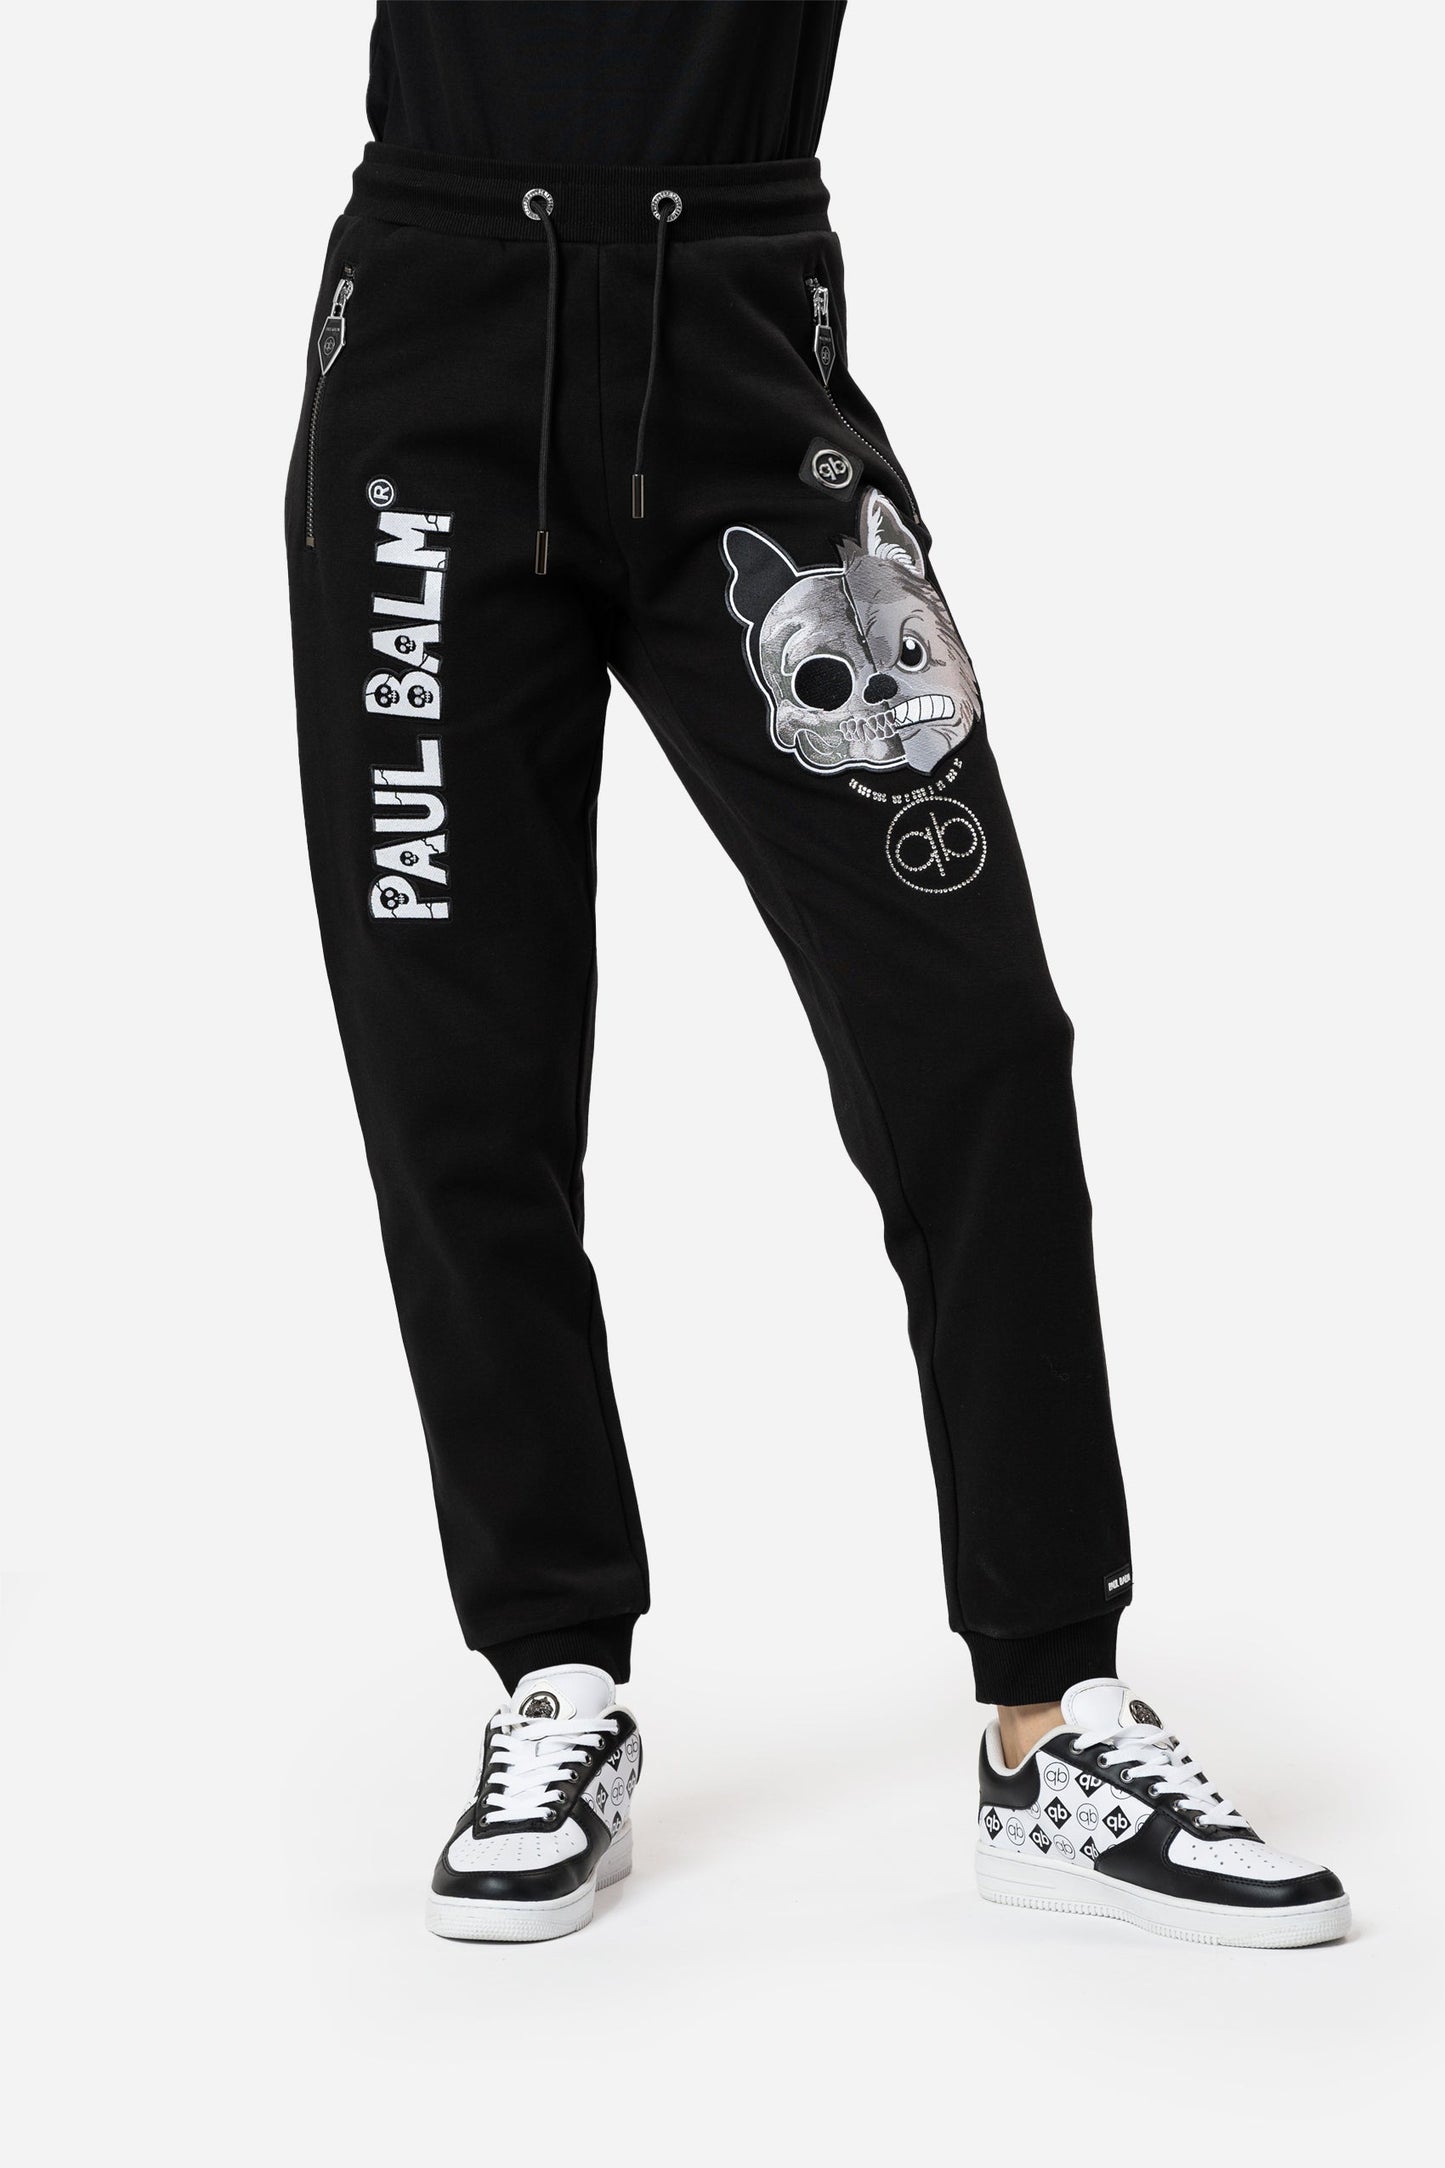 Scull Embroidery Pants - Limited to 300